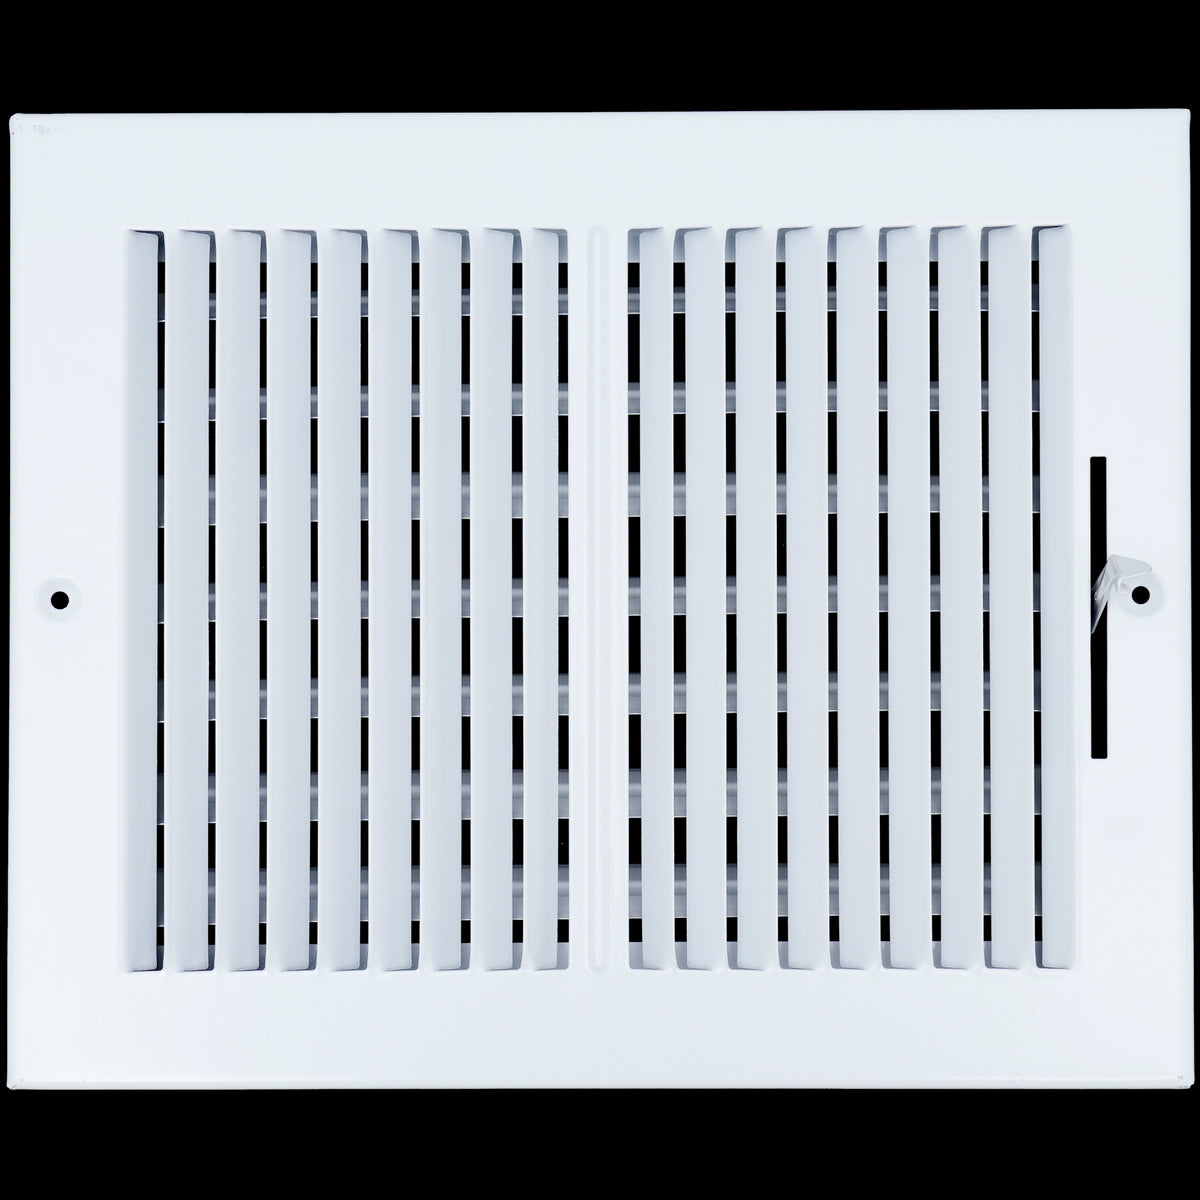 10 X 8 Duct Opening | 2 WAY Steel Air Supply Diffuser for Sidewall and Ceiling